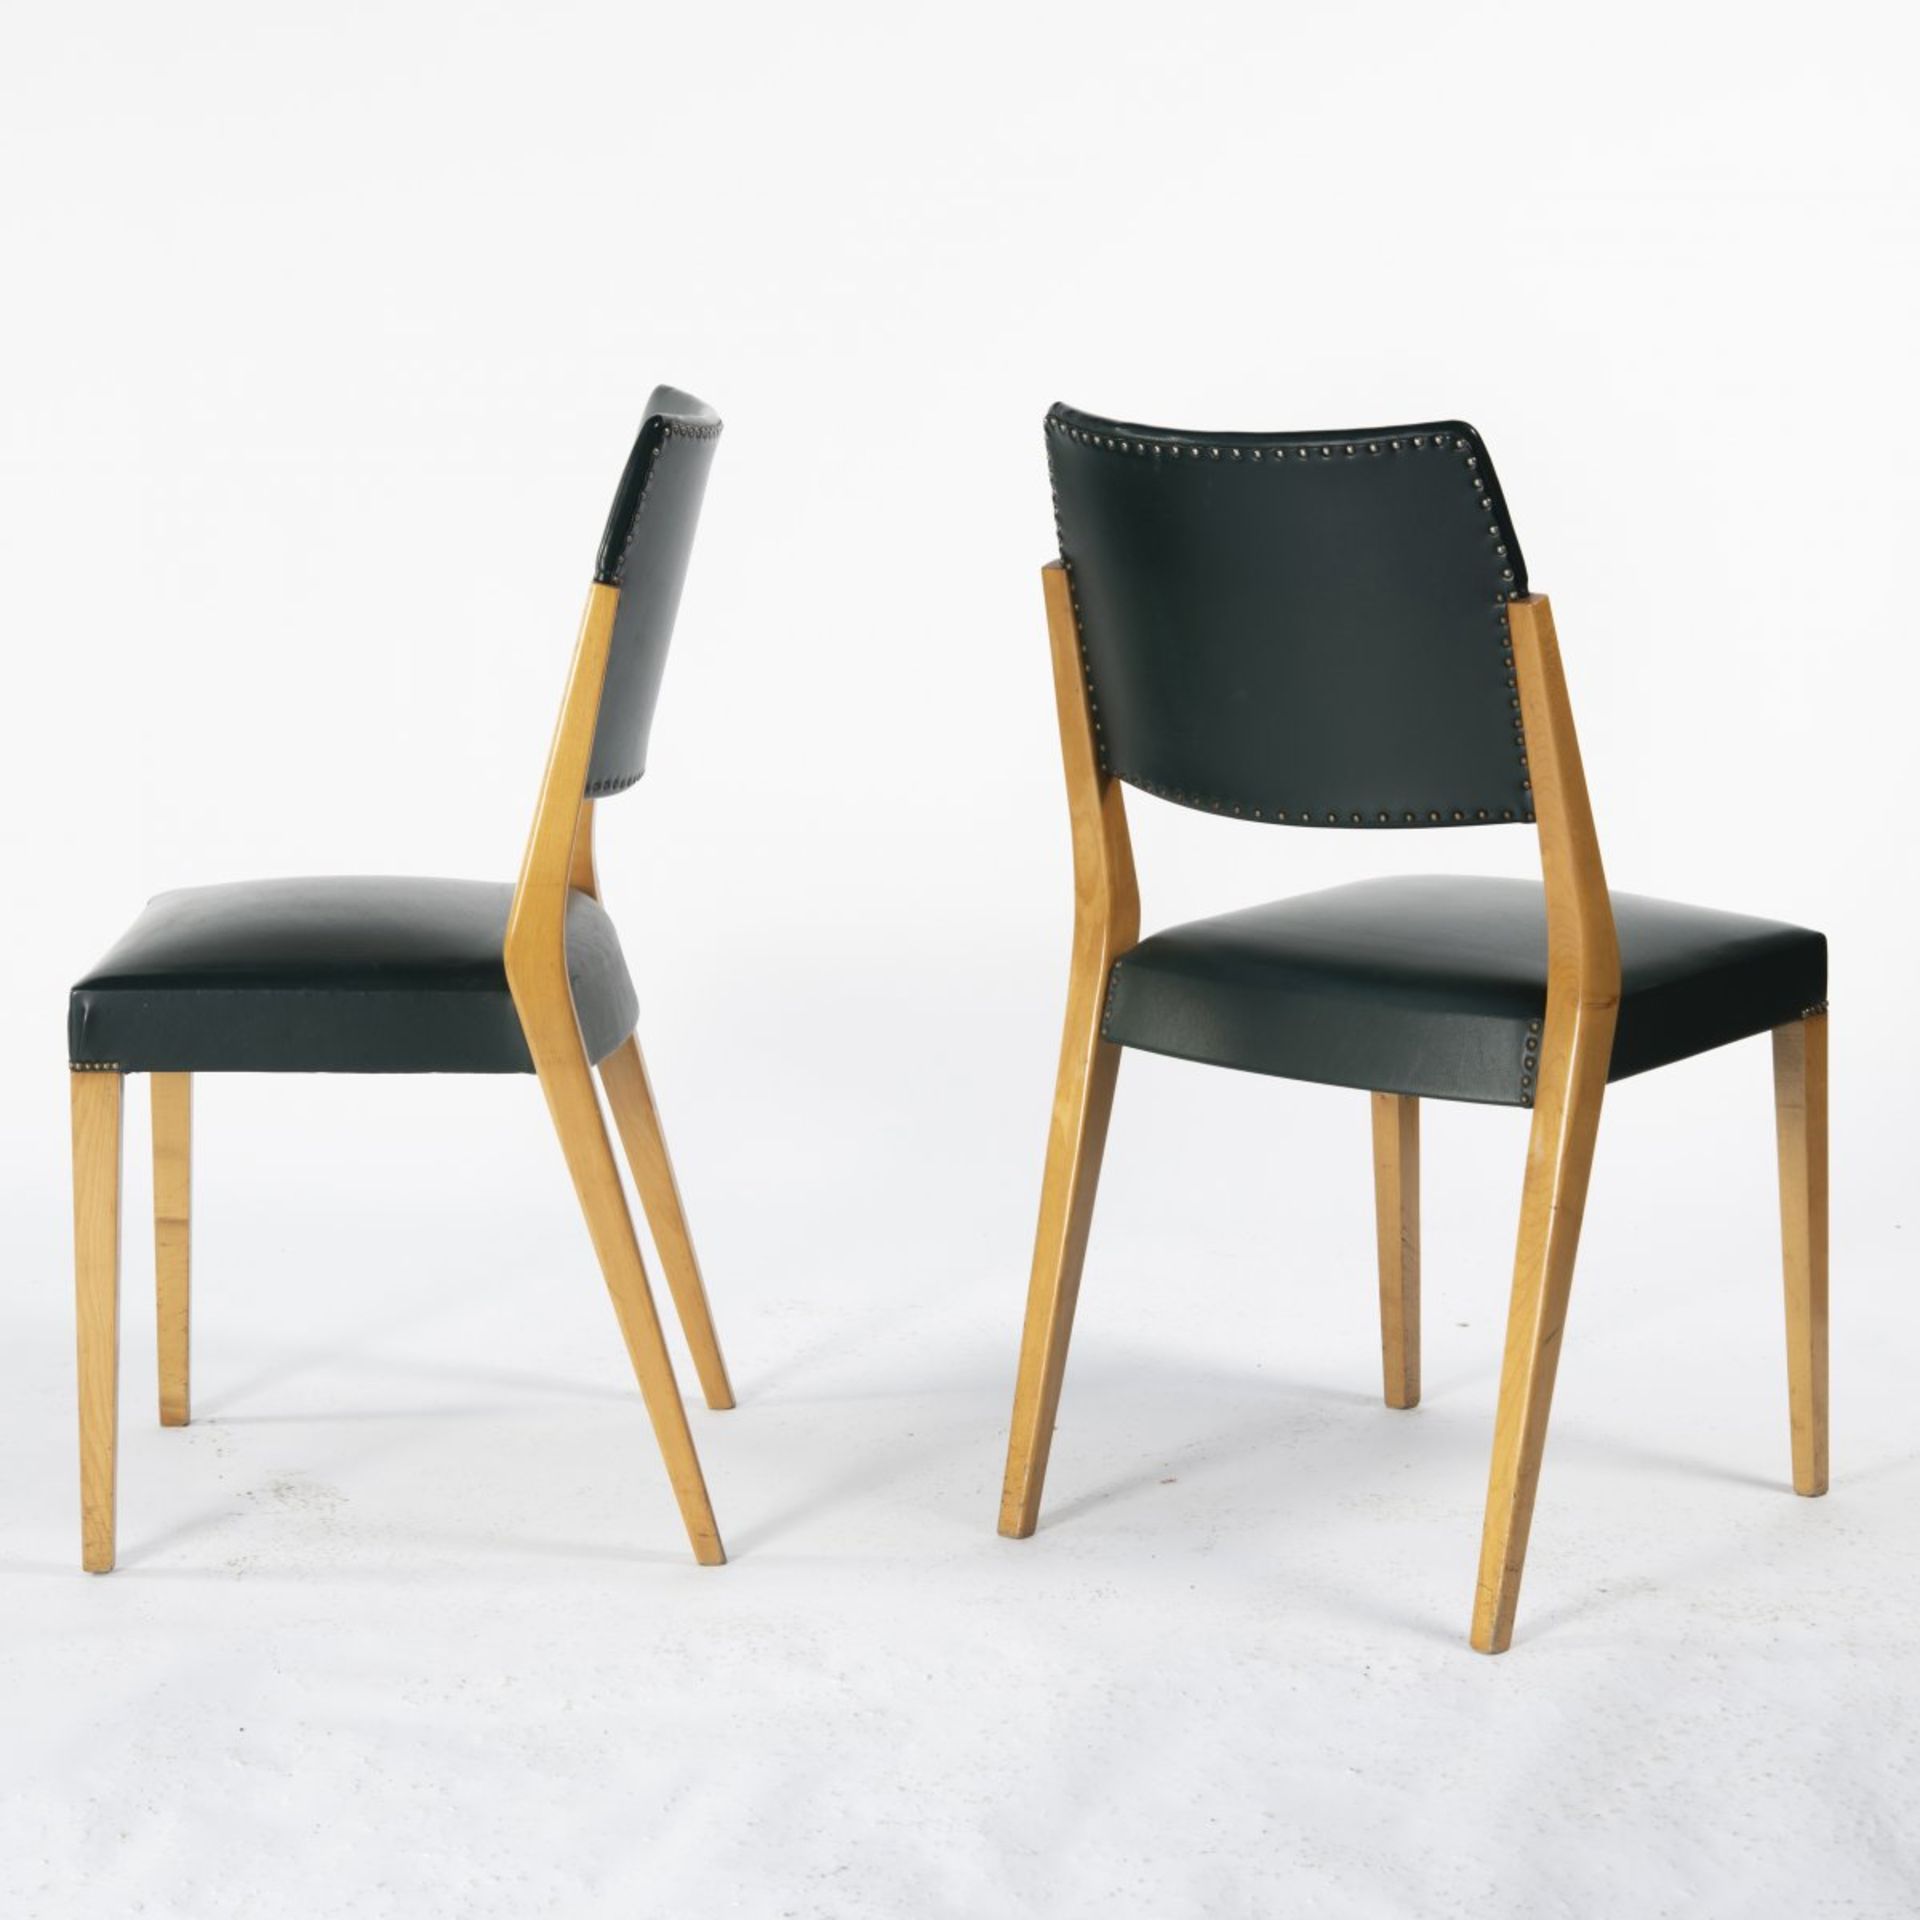 Karl Schwanzer, Two stacking chairs 'S-764P', 1953Two stacking chairs 'S-764P', 1953H. 86 x 49.5 x - Bild 8 aus 13